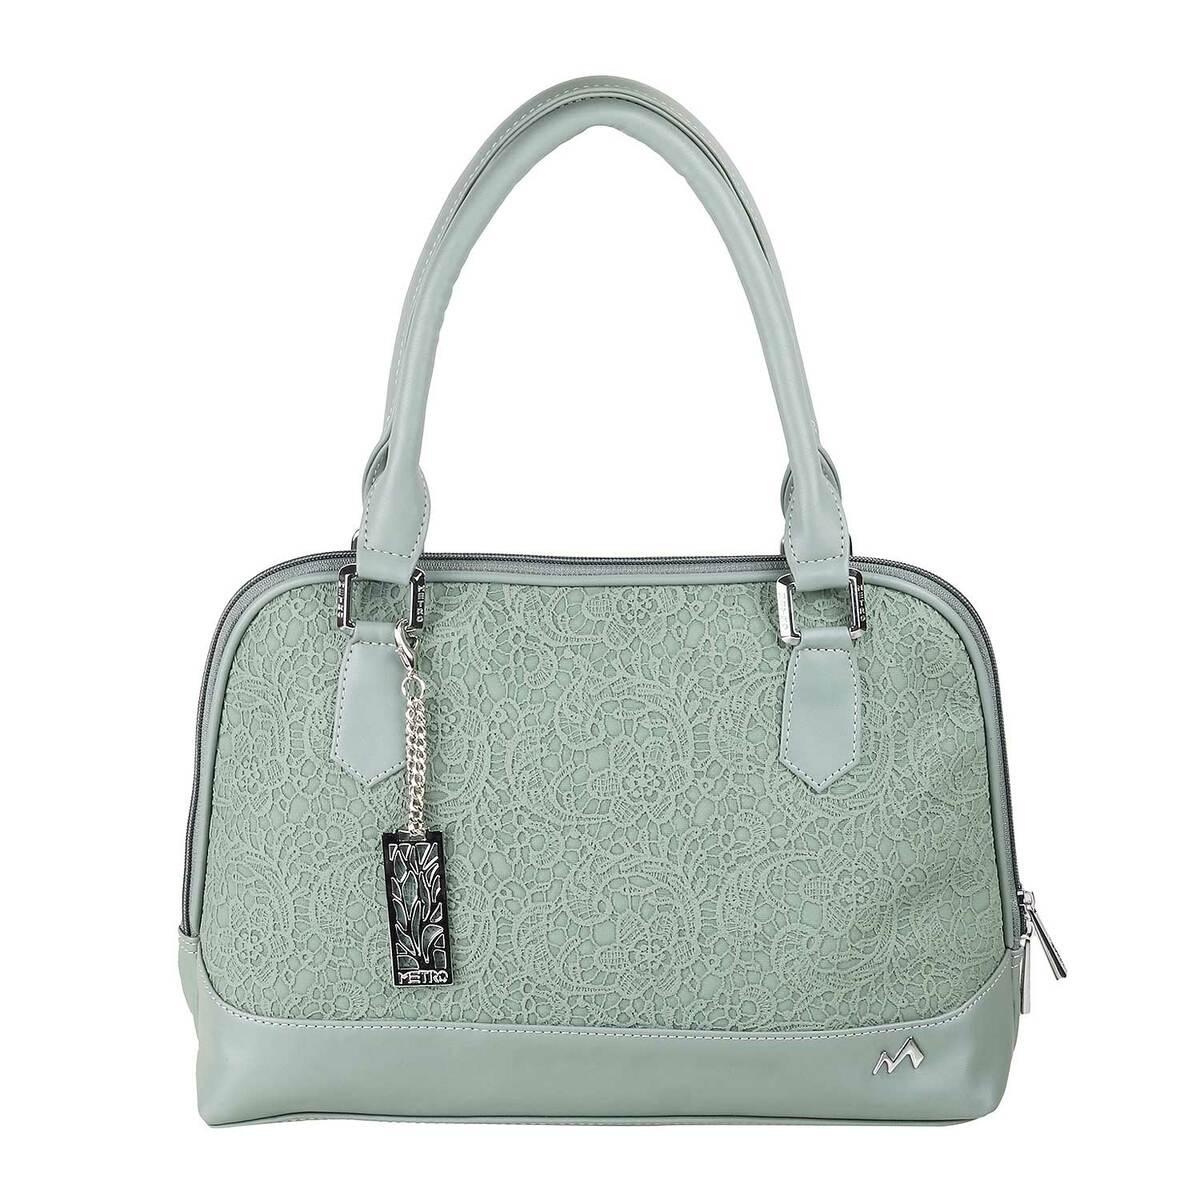 Buy Guess Bags & Handbags online - Women - 120 products | FASHIOLA.in